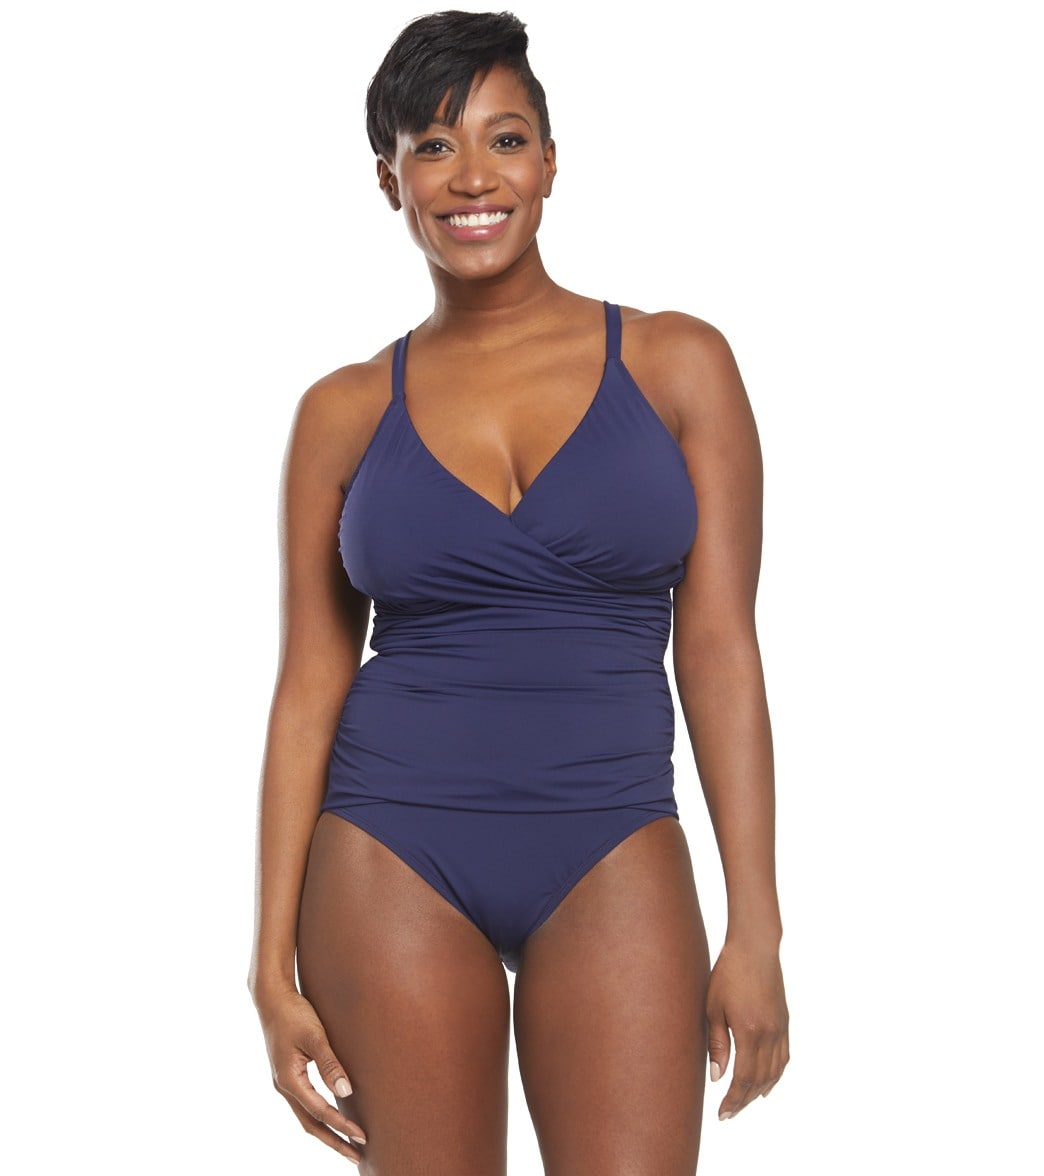 Tommy Bahama Pearl Solids Cross Front One Piece Swimsuit D/Dd Cup - Mare Navy 12D/Dd - Swimoutlet.com